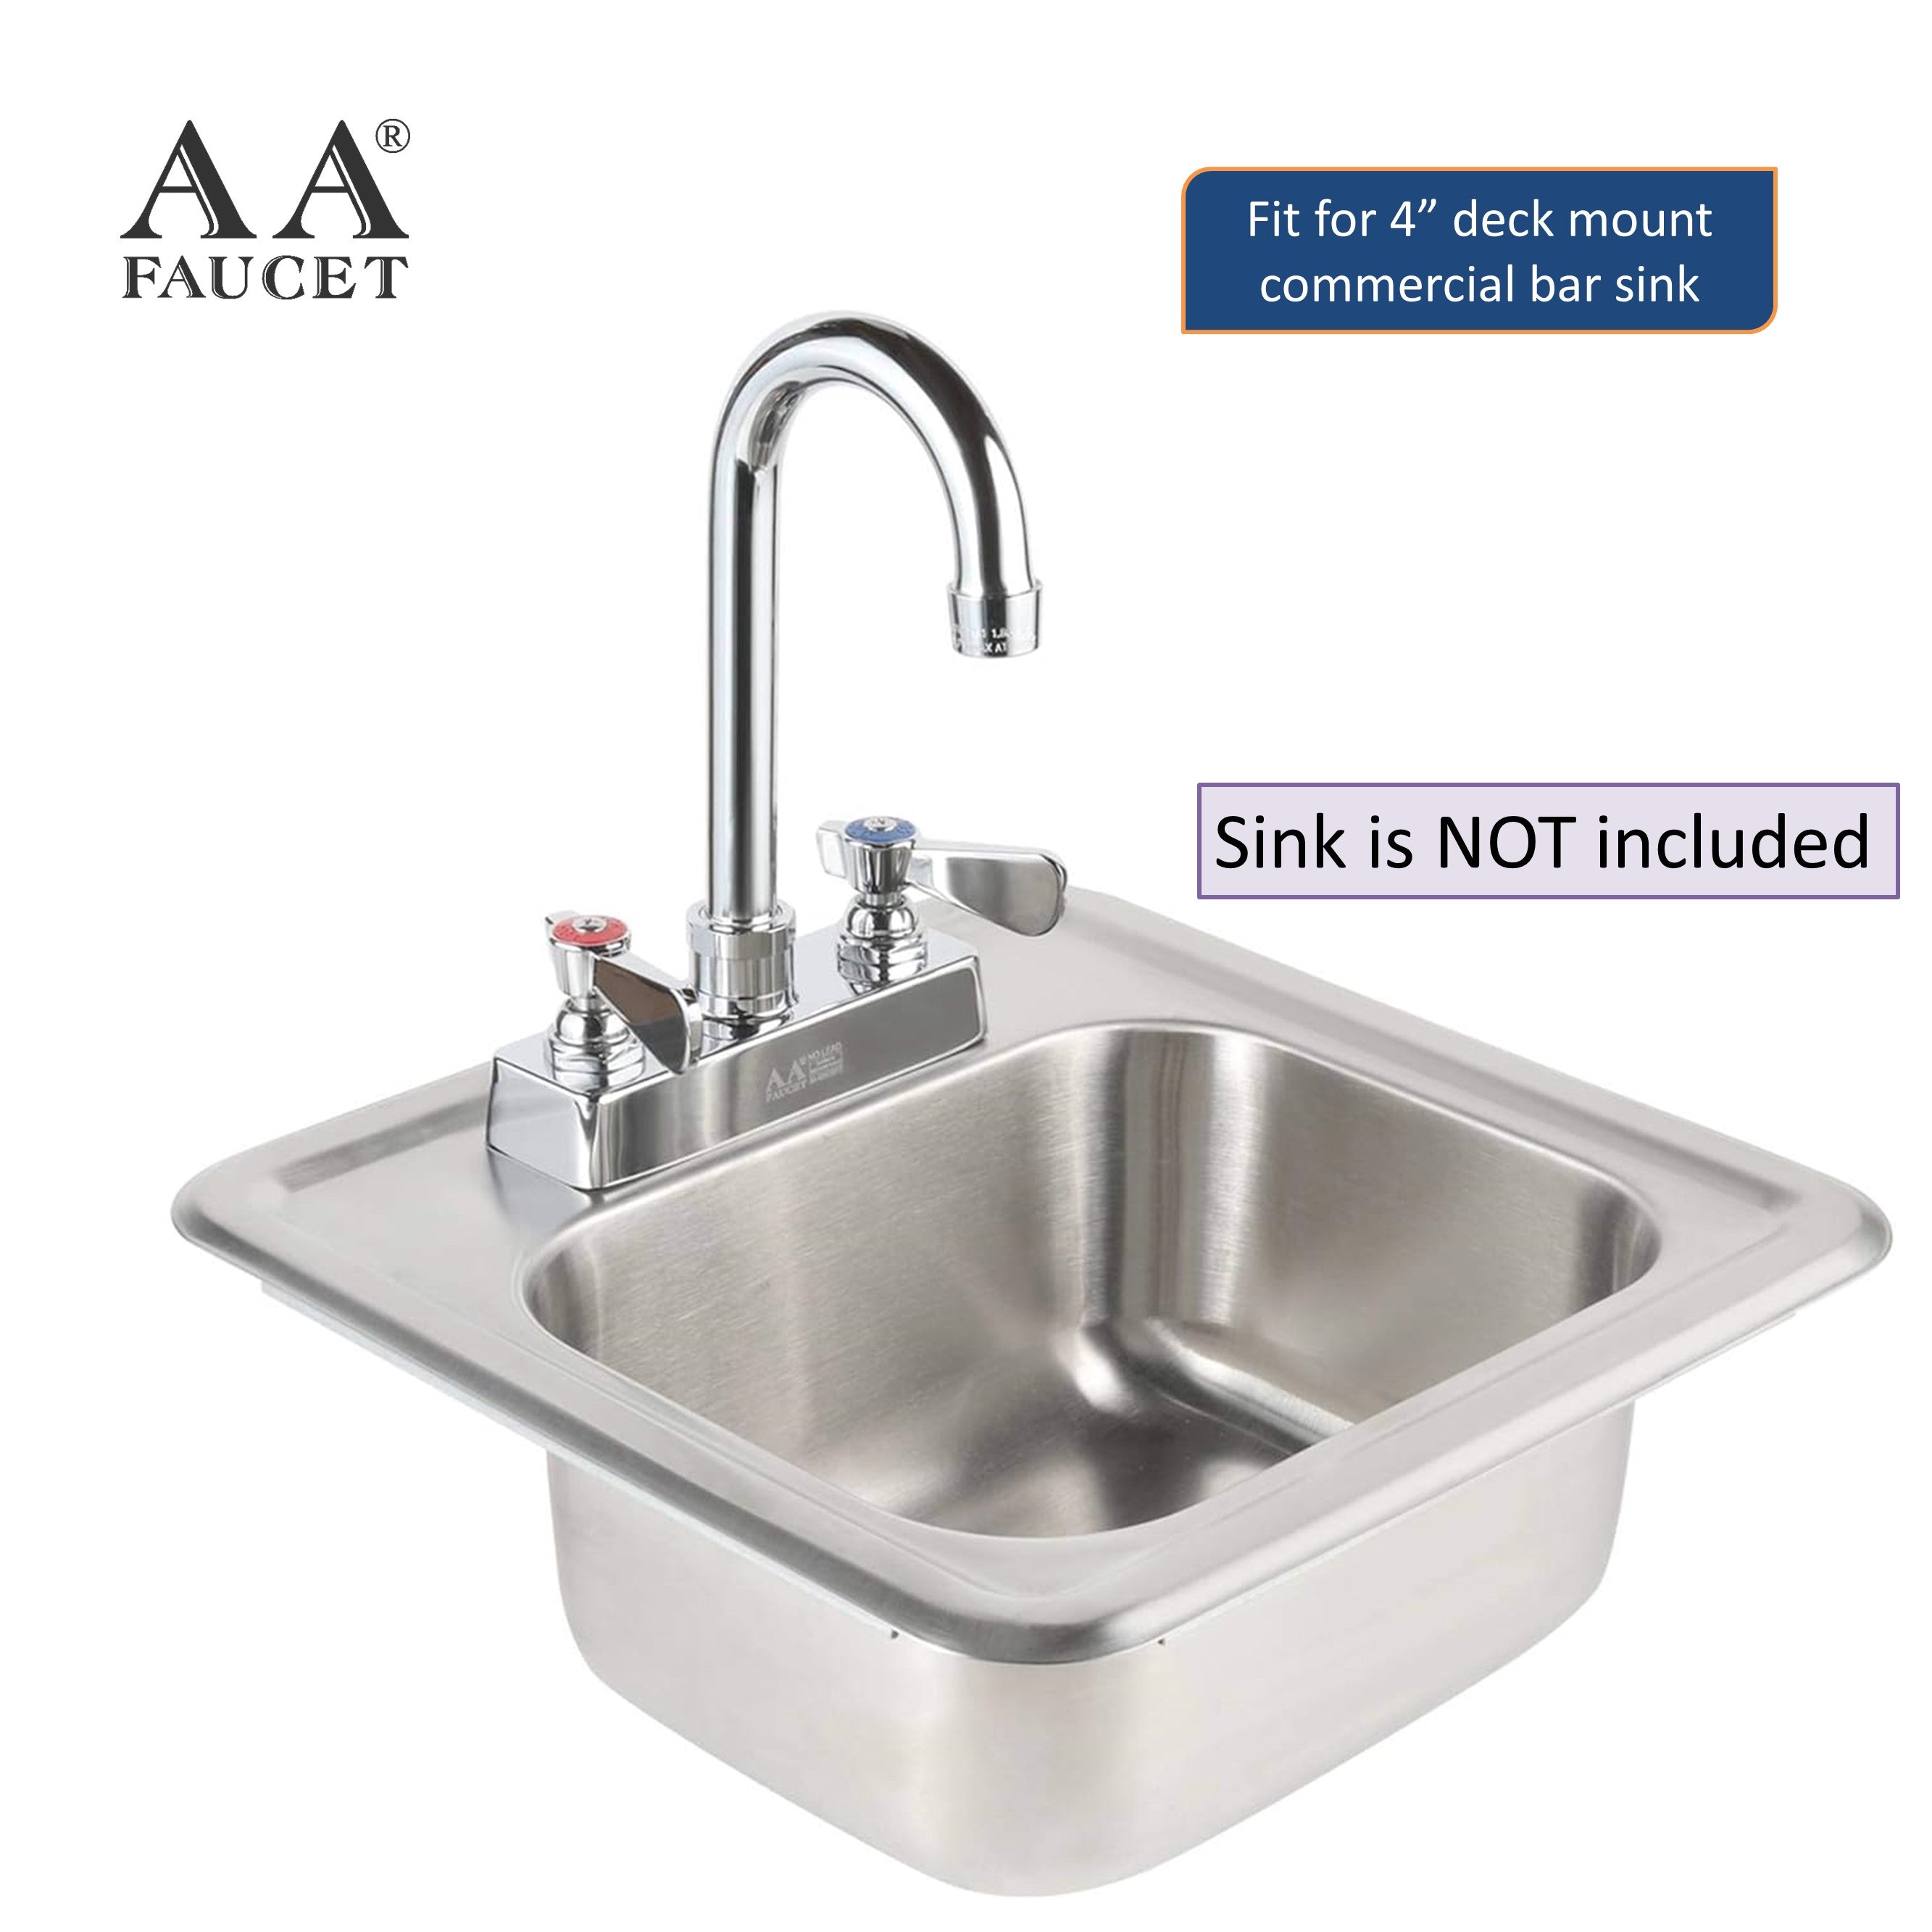 AA Faucet 4" Deck Mount Commercial Bar Sink Faucet with 6" Gooseneck Spout, Brass Construction Chrome Polished for Restaurant Kitchen NSF Approved